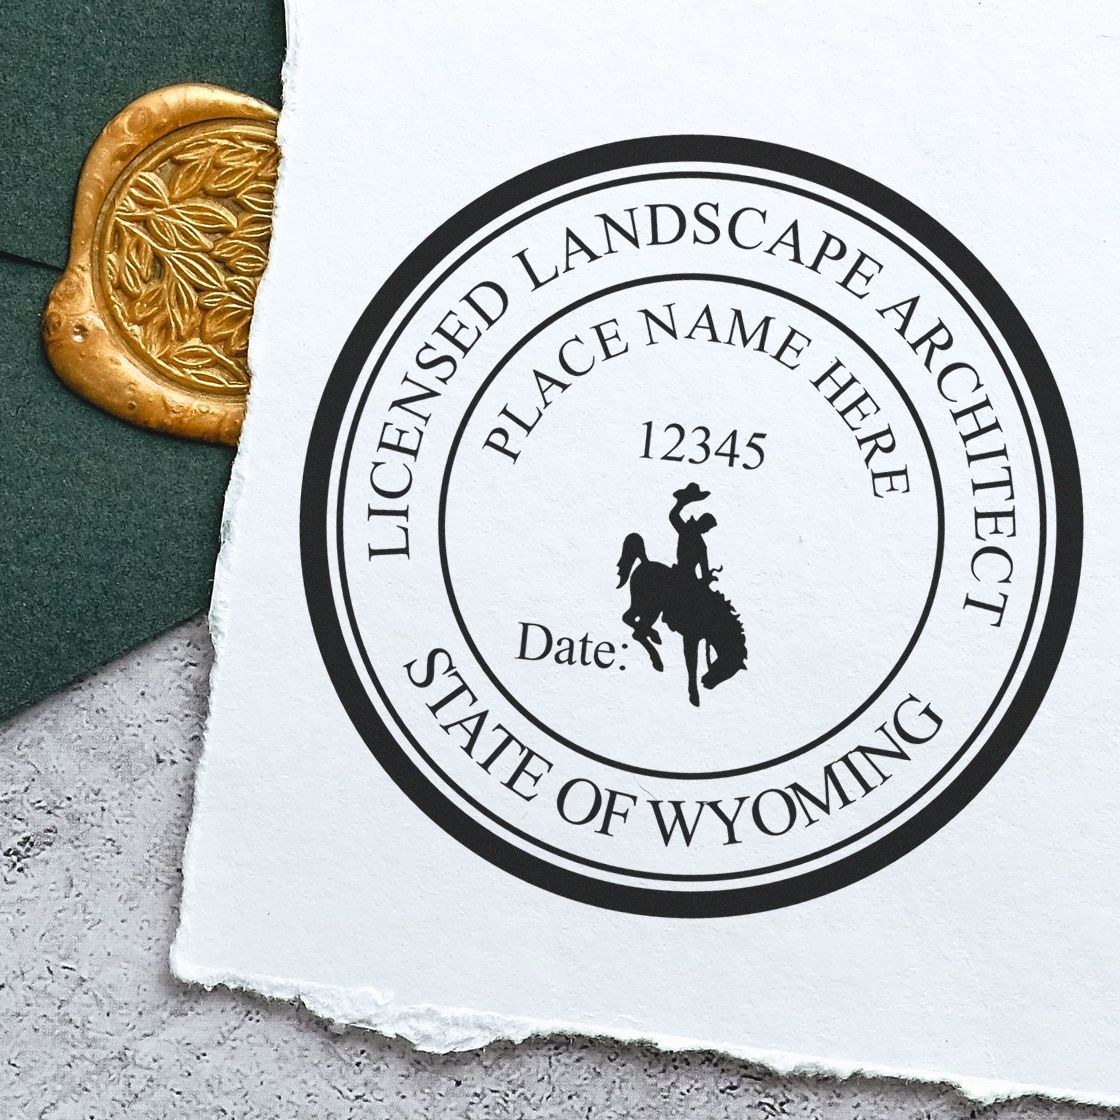 A lifestyle photo showing a stamped image of the Wyoming Landscape Architectural Seal Stamp on a piece of paper